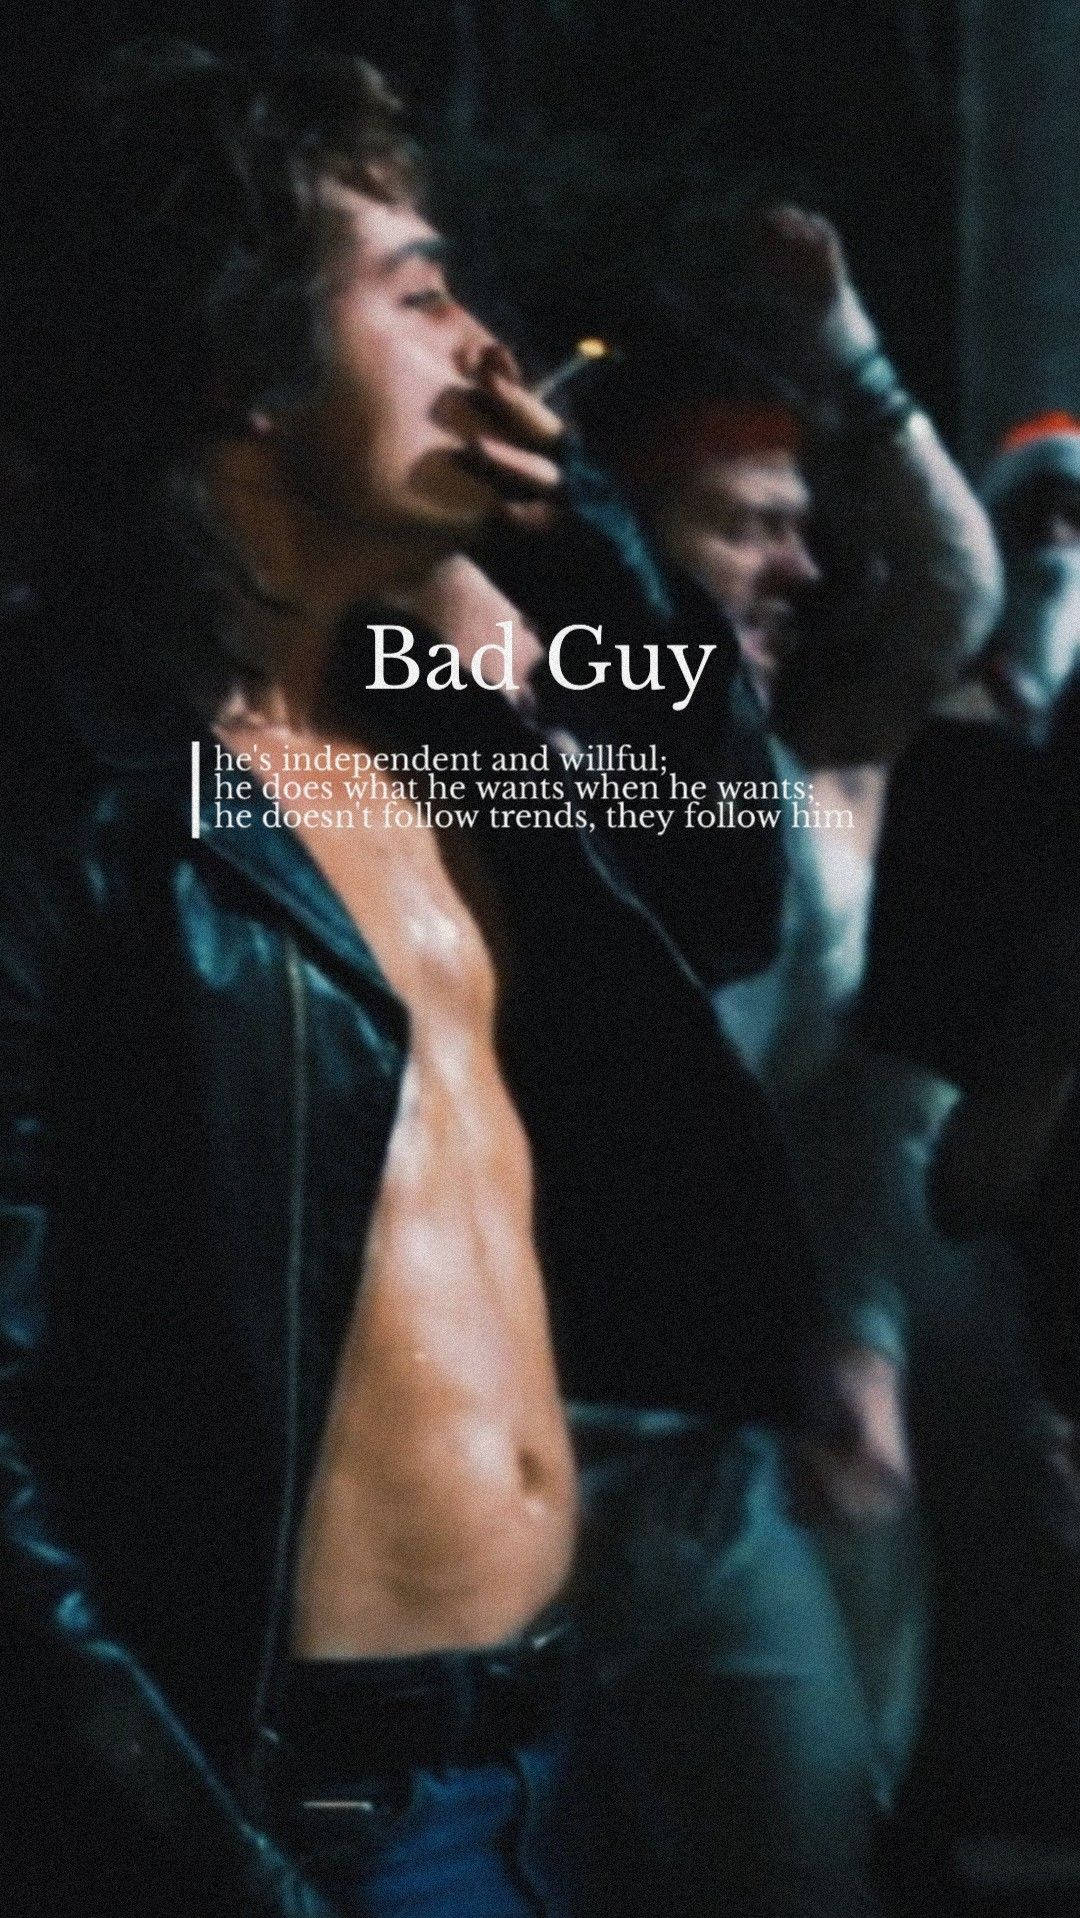 Bad Guy Poster Of Billy Hargrove Wallpaper